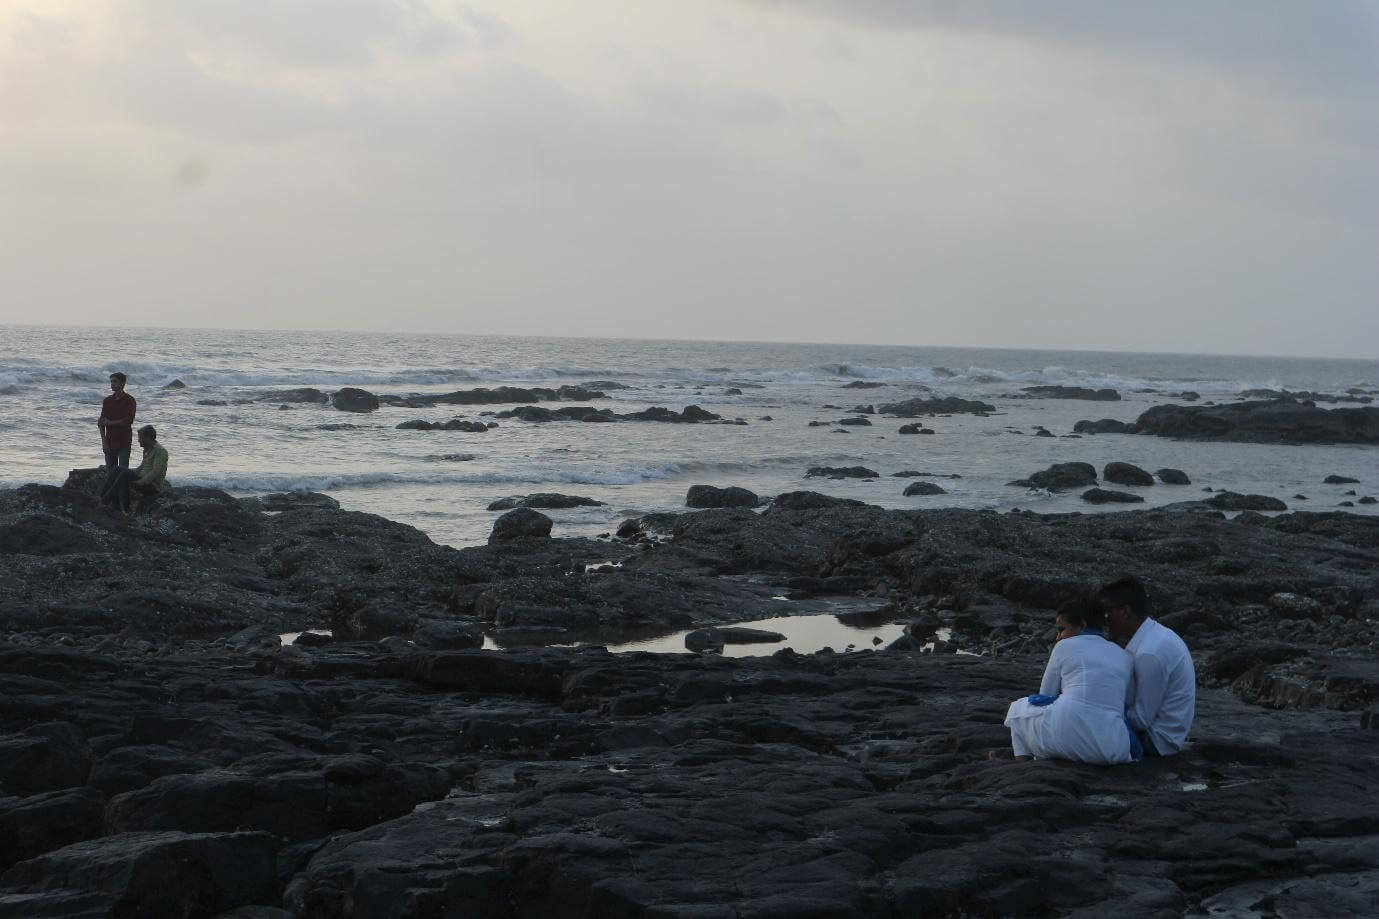 A man and woman (both dressed in white) whispering to each other while sitting on the rocks.